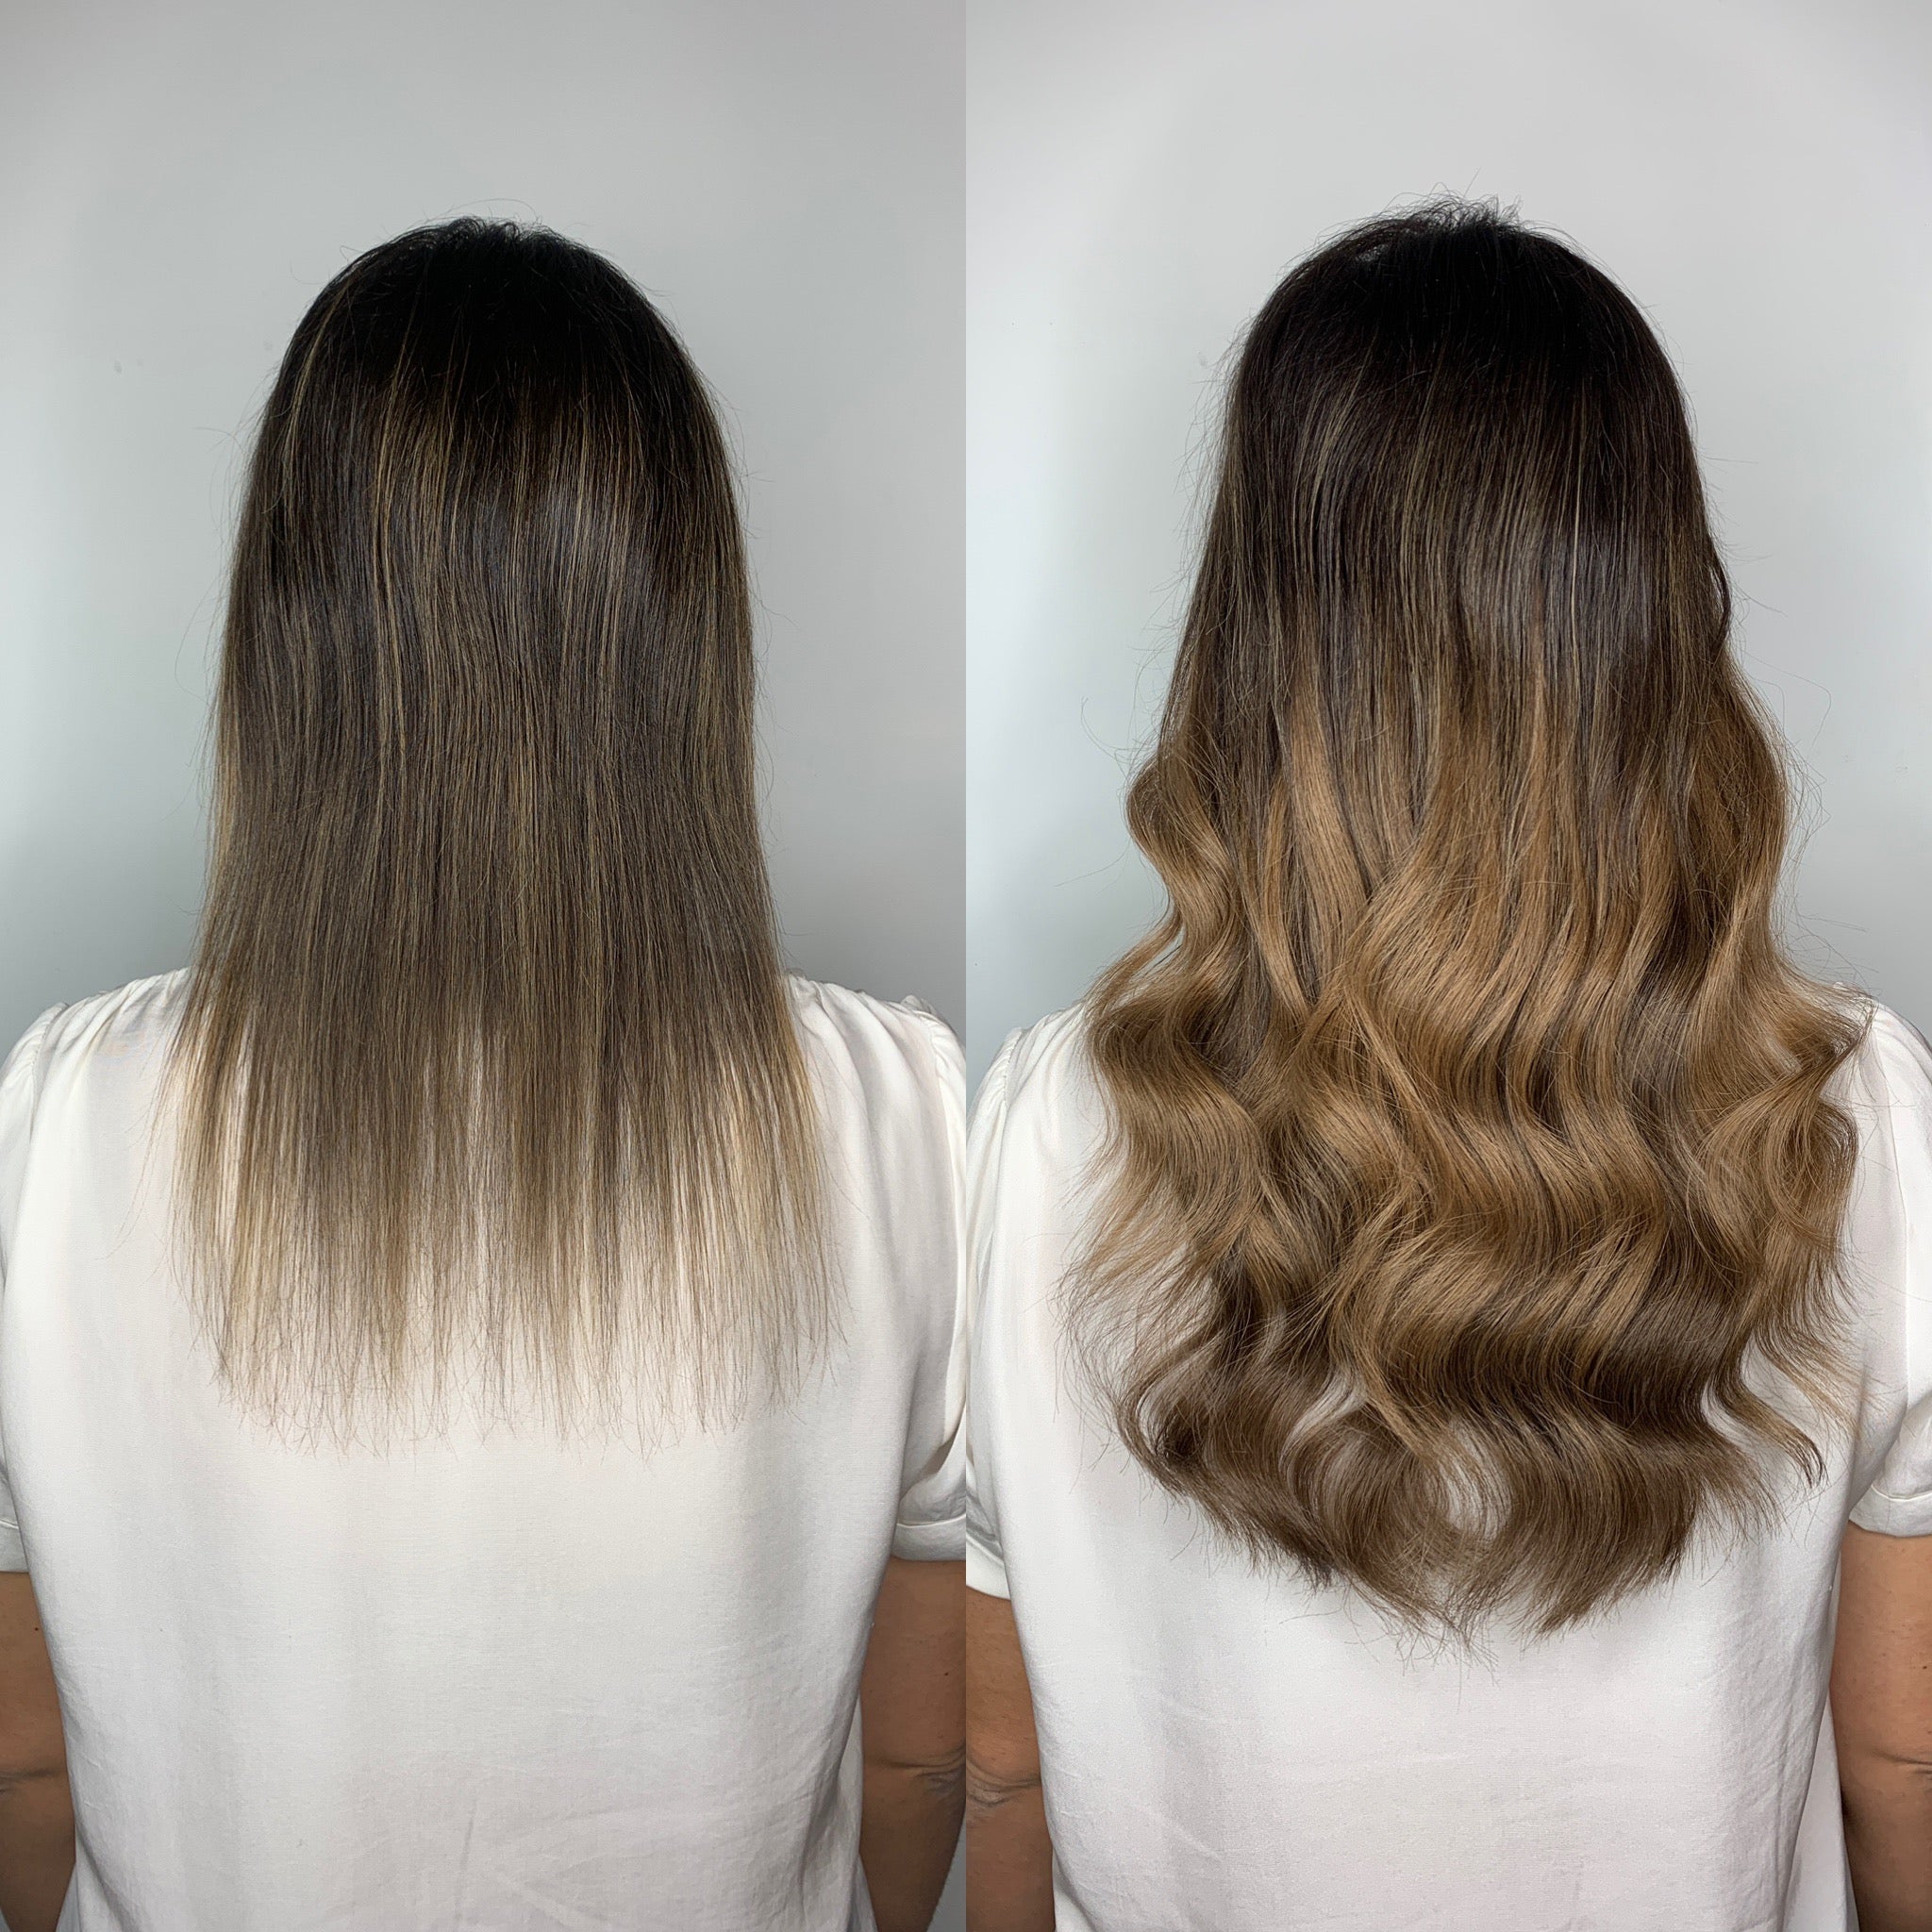 The Magic of Strands Class $450 (3 hours)